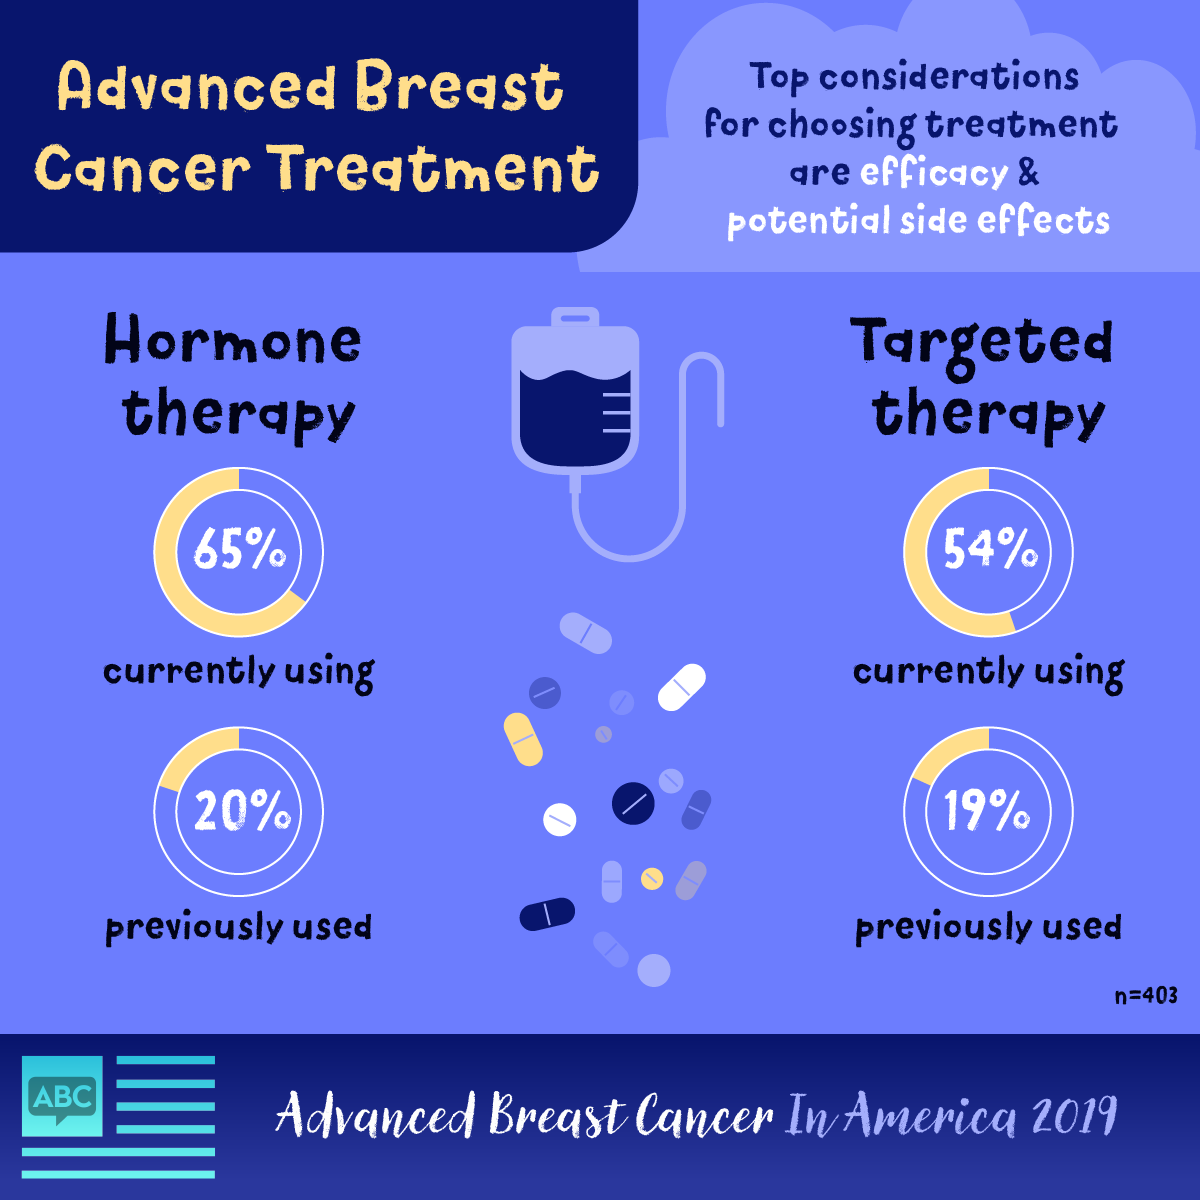 Hormone & targeted therapies are the most used advanced breast cancer treatments. Efficacy and side effects influence treatment choice.